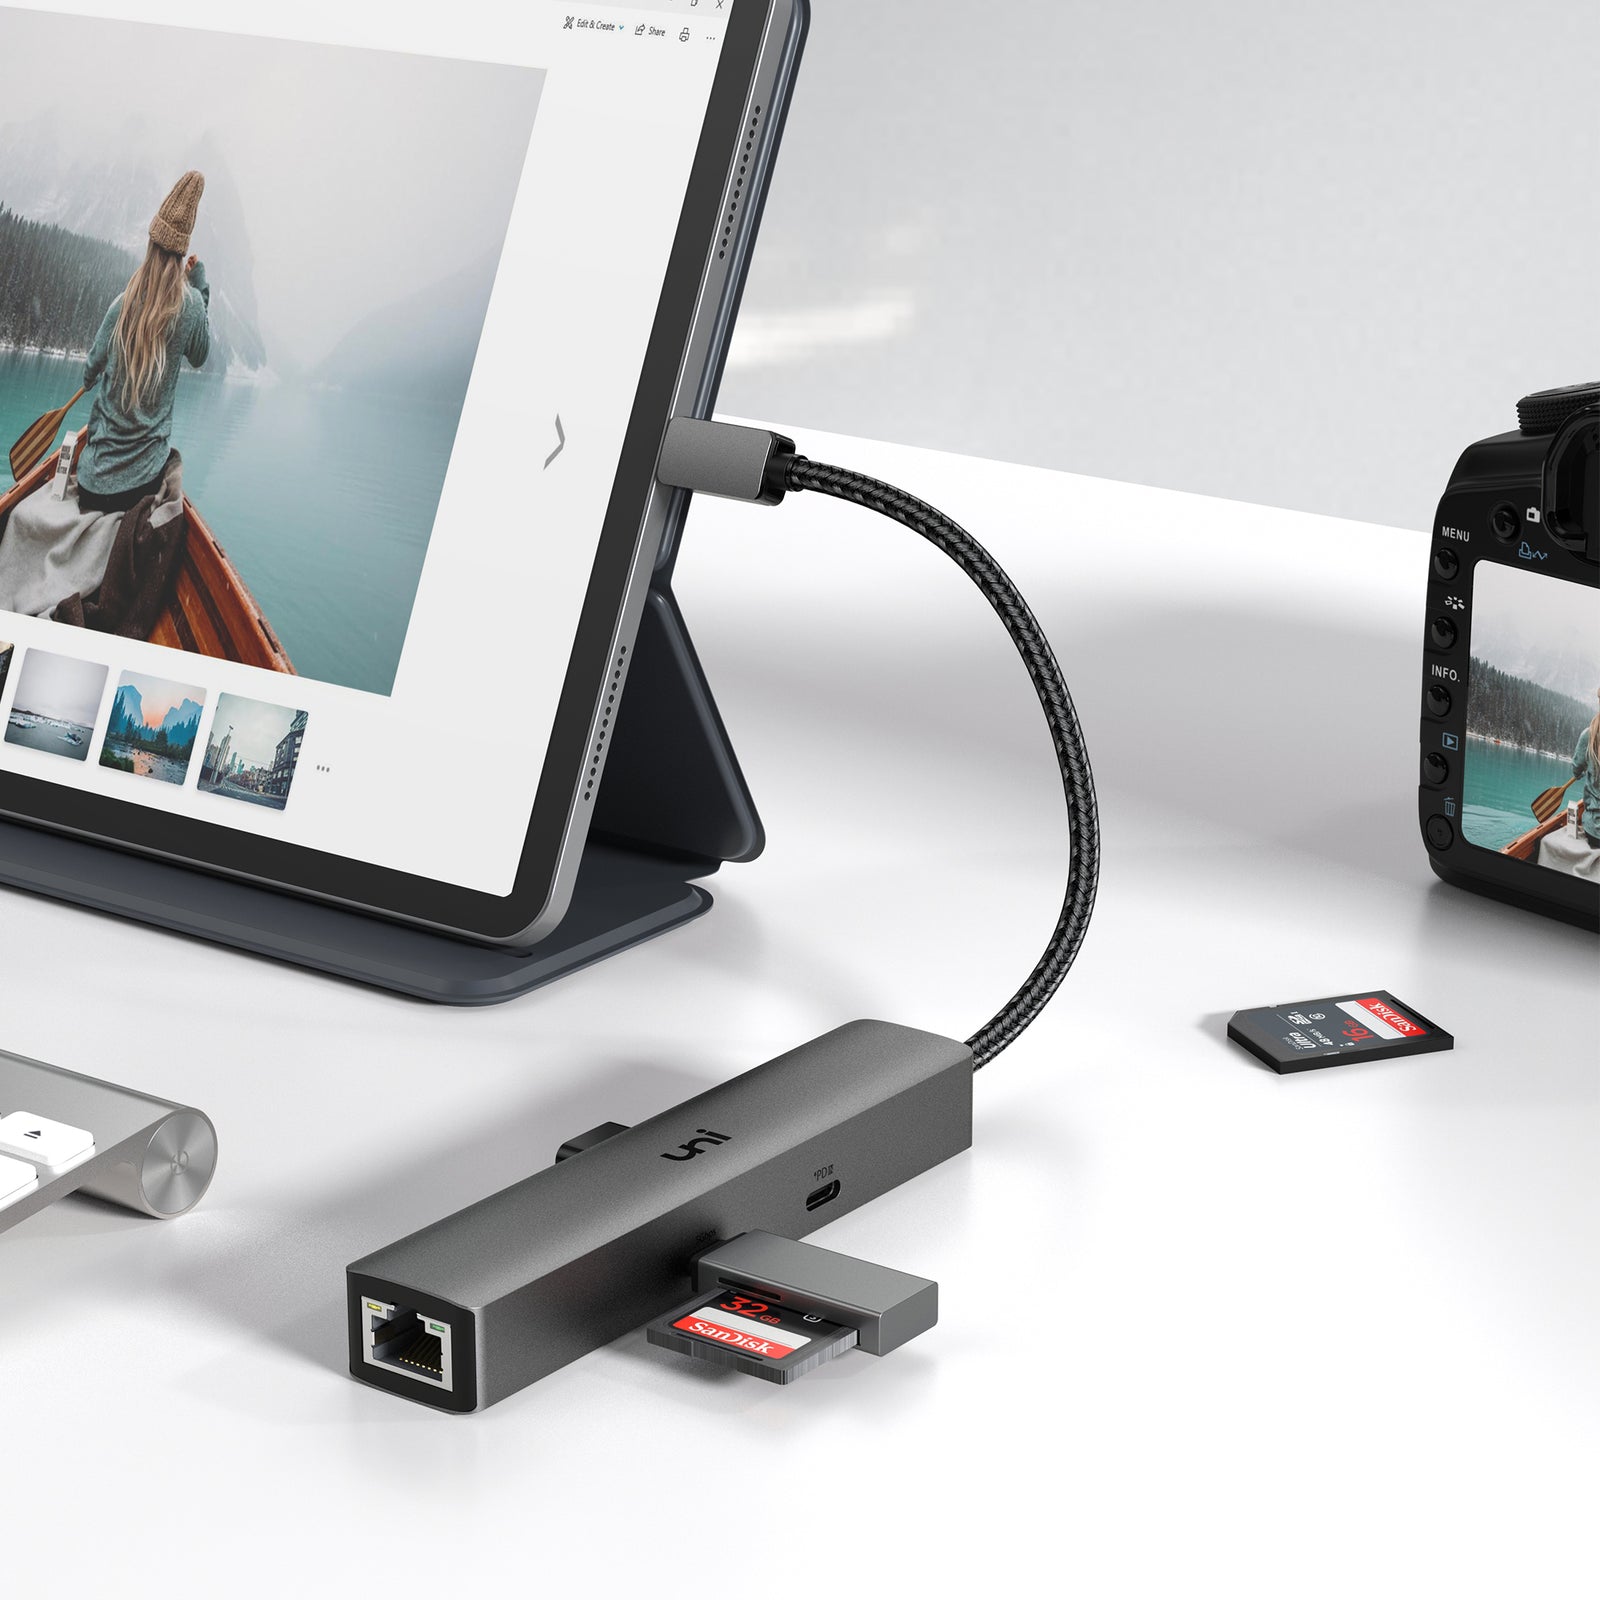 Adaptateur USB-C vers Ethernet (5 Gbps)